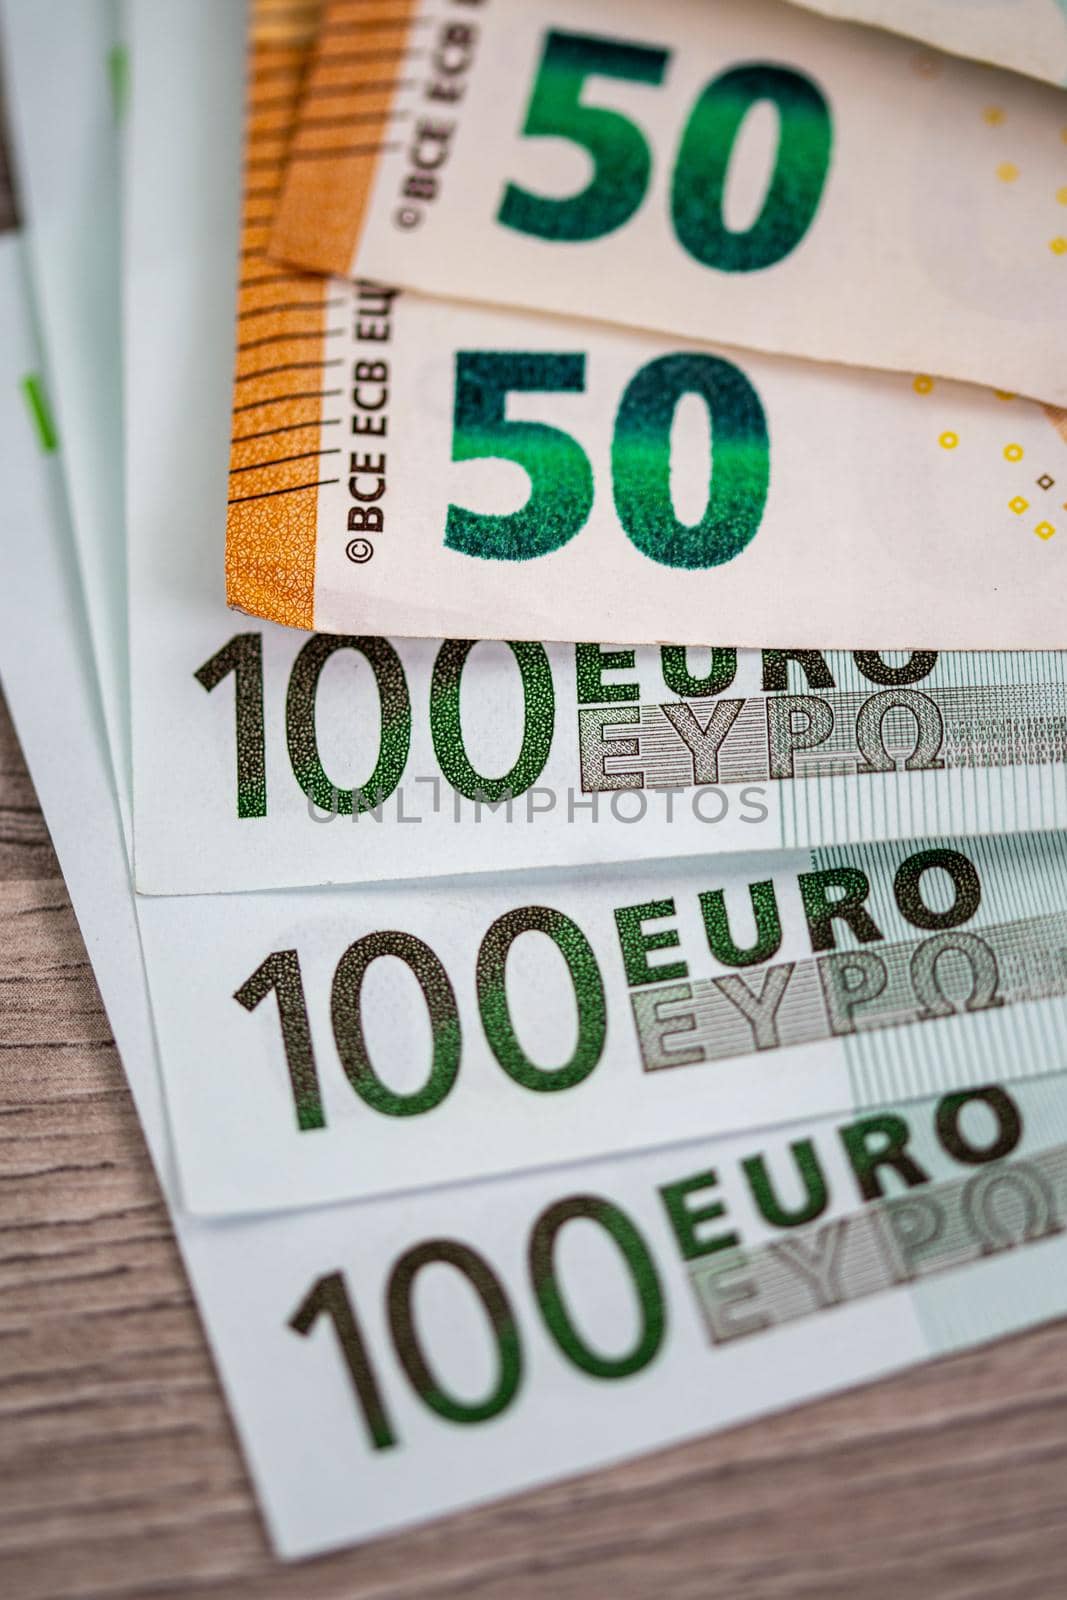 banknotes of 50 and 100 euros by carfedeph